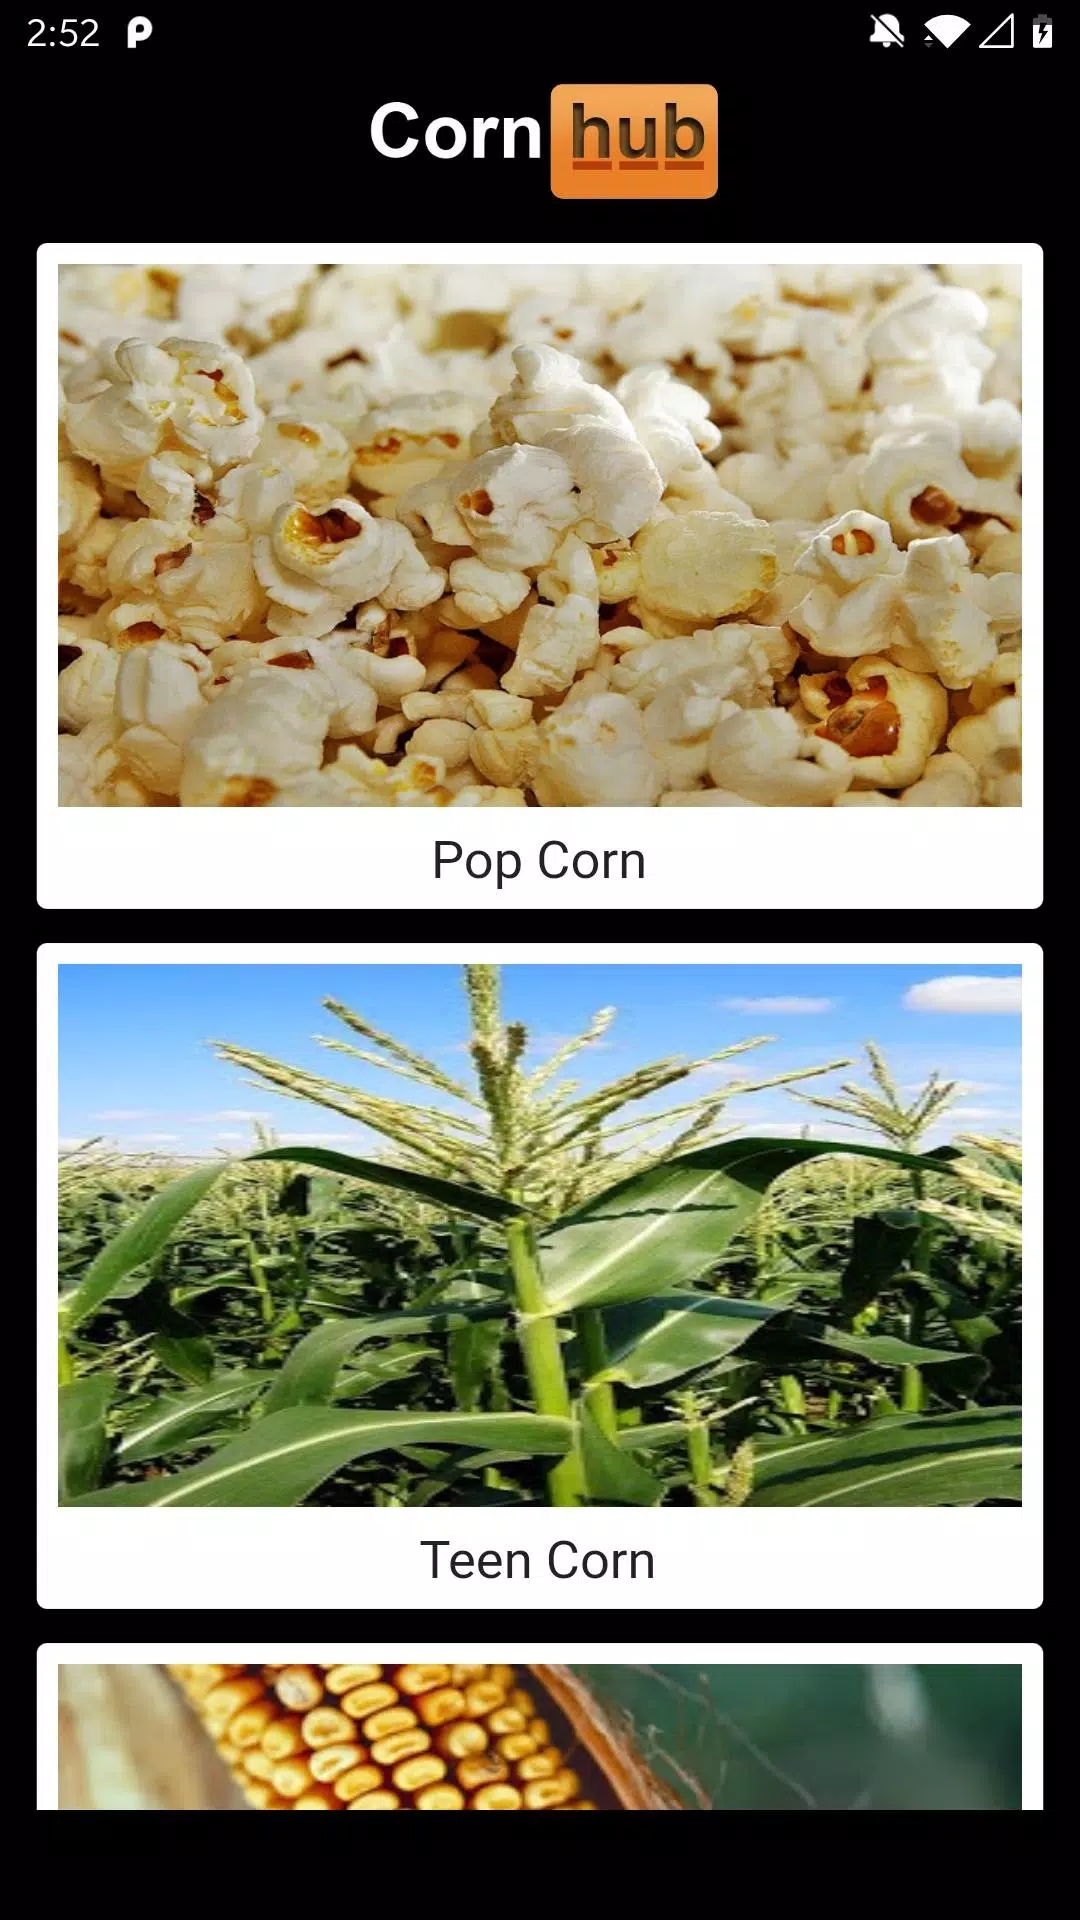 CornHub for Android - APK Download